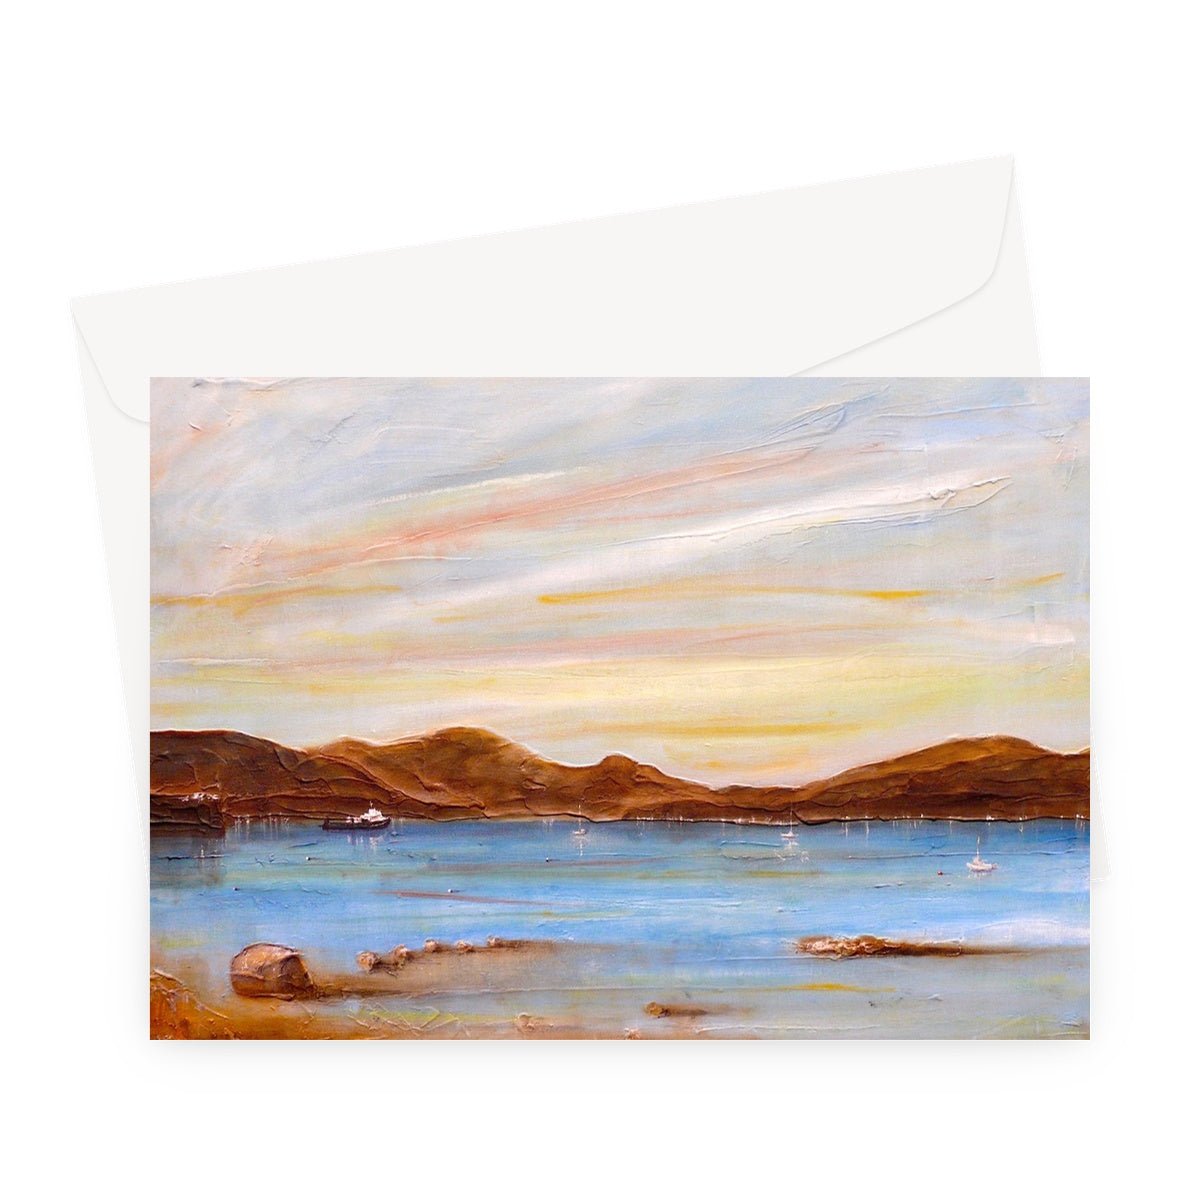 The Last Ferry To Dunoon Art Gifts Greeting Card-Greetings Cards-River Clyde Art Gallery-A5 Landscape-10 Cards-Paintings, Prints, Homeware, Art Gifts From Scotland By Scottish Artist Kevin Hunter